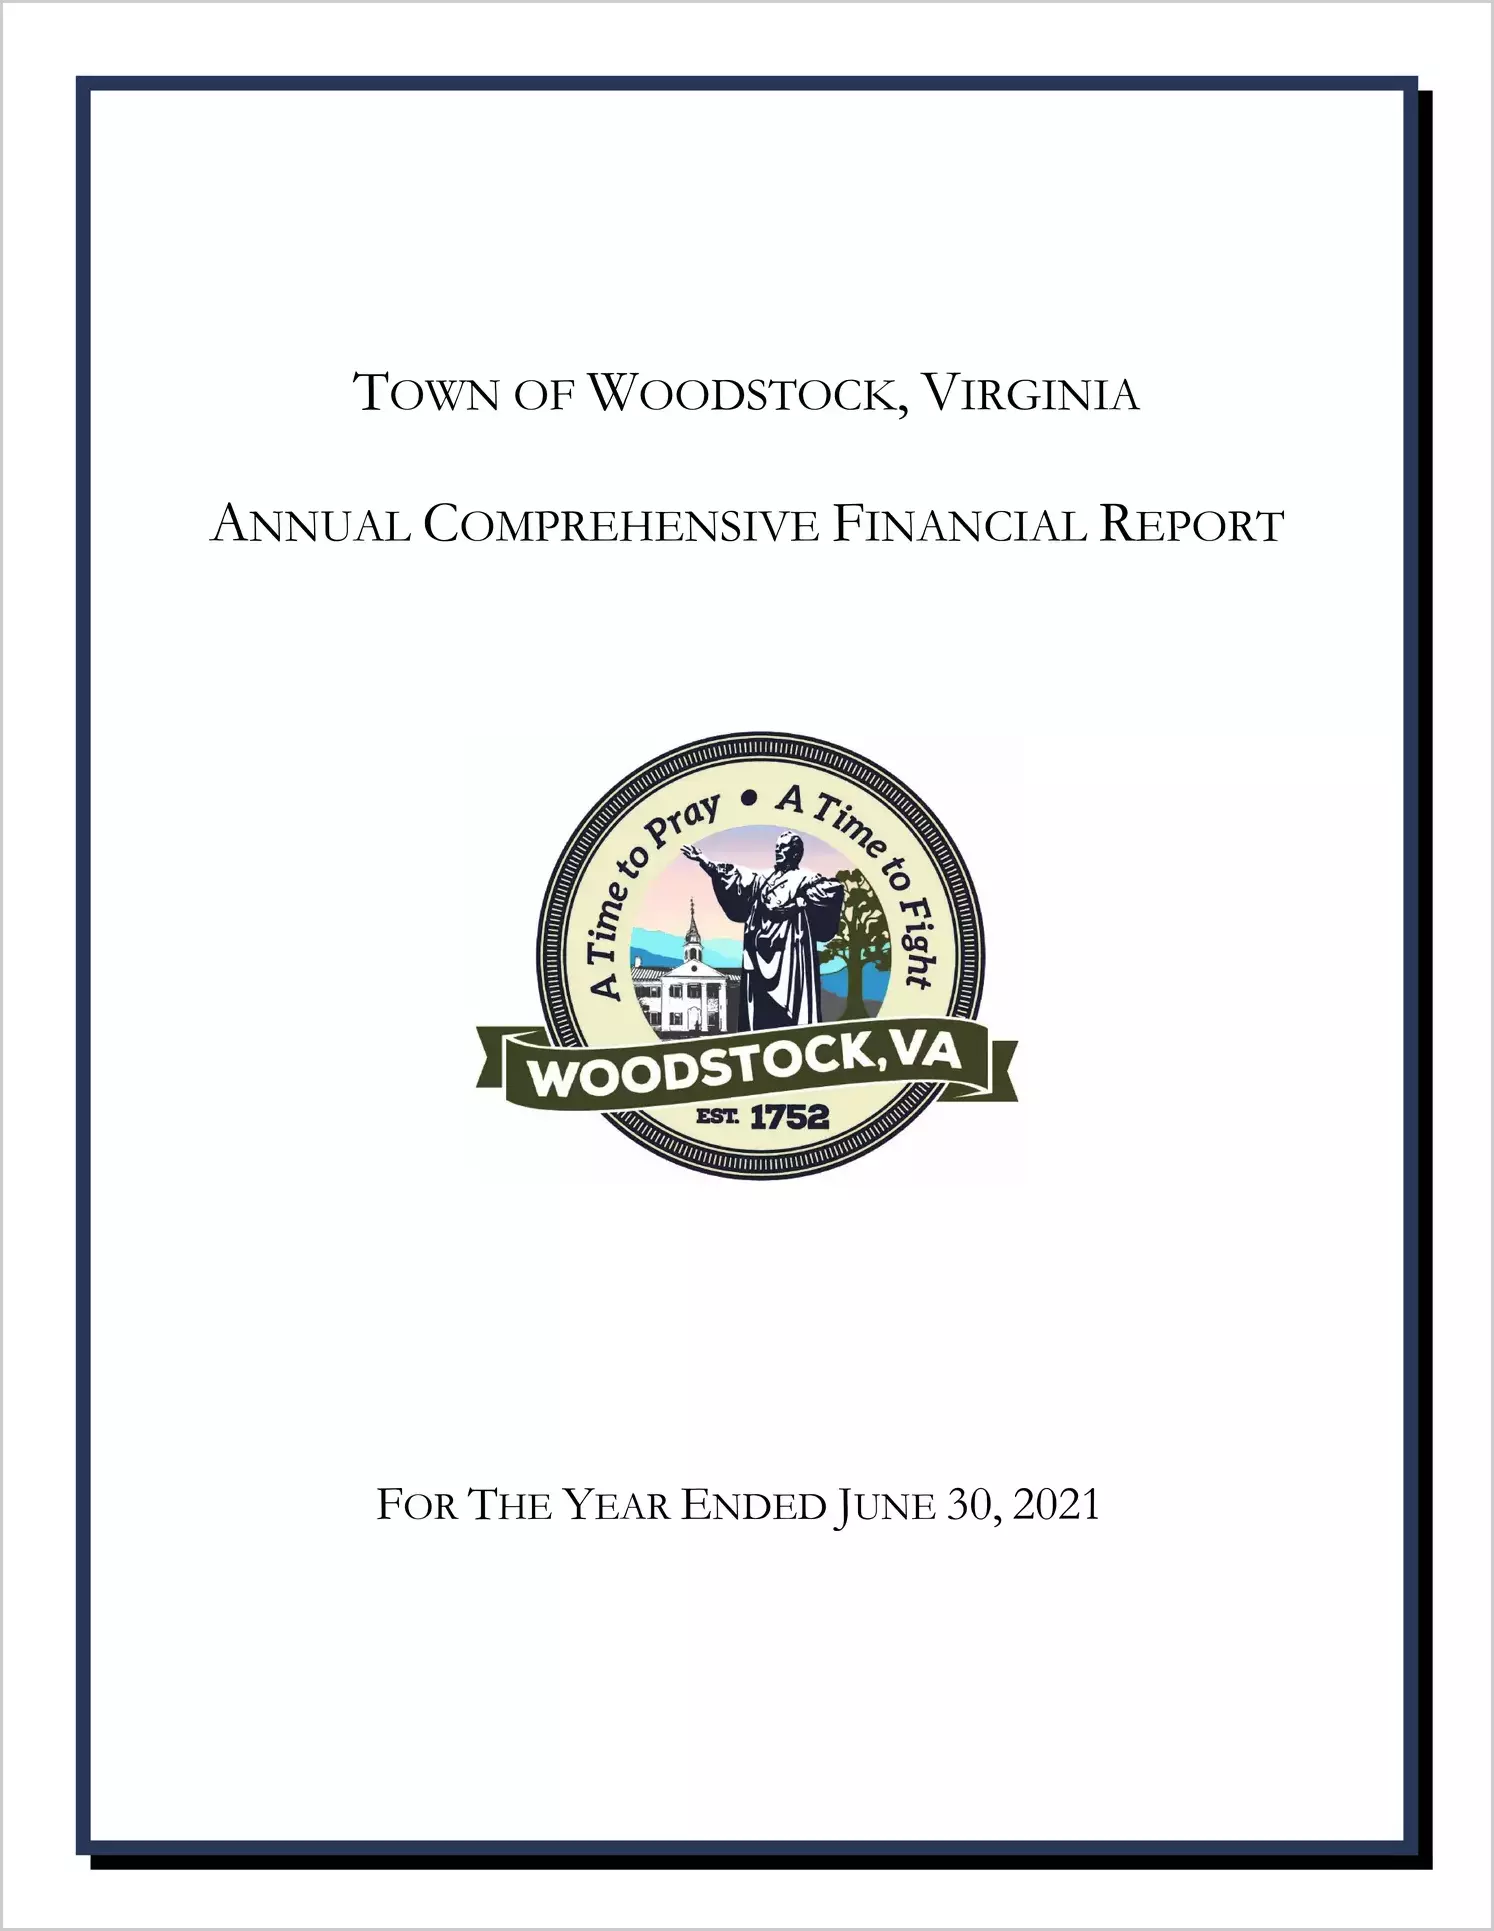 2021 Annual Financial Report for Town of Woodstock